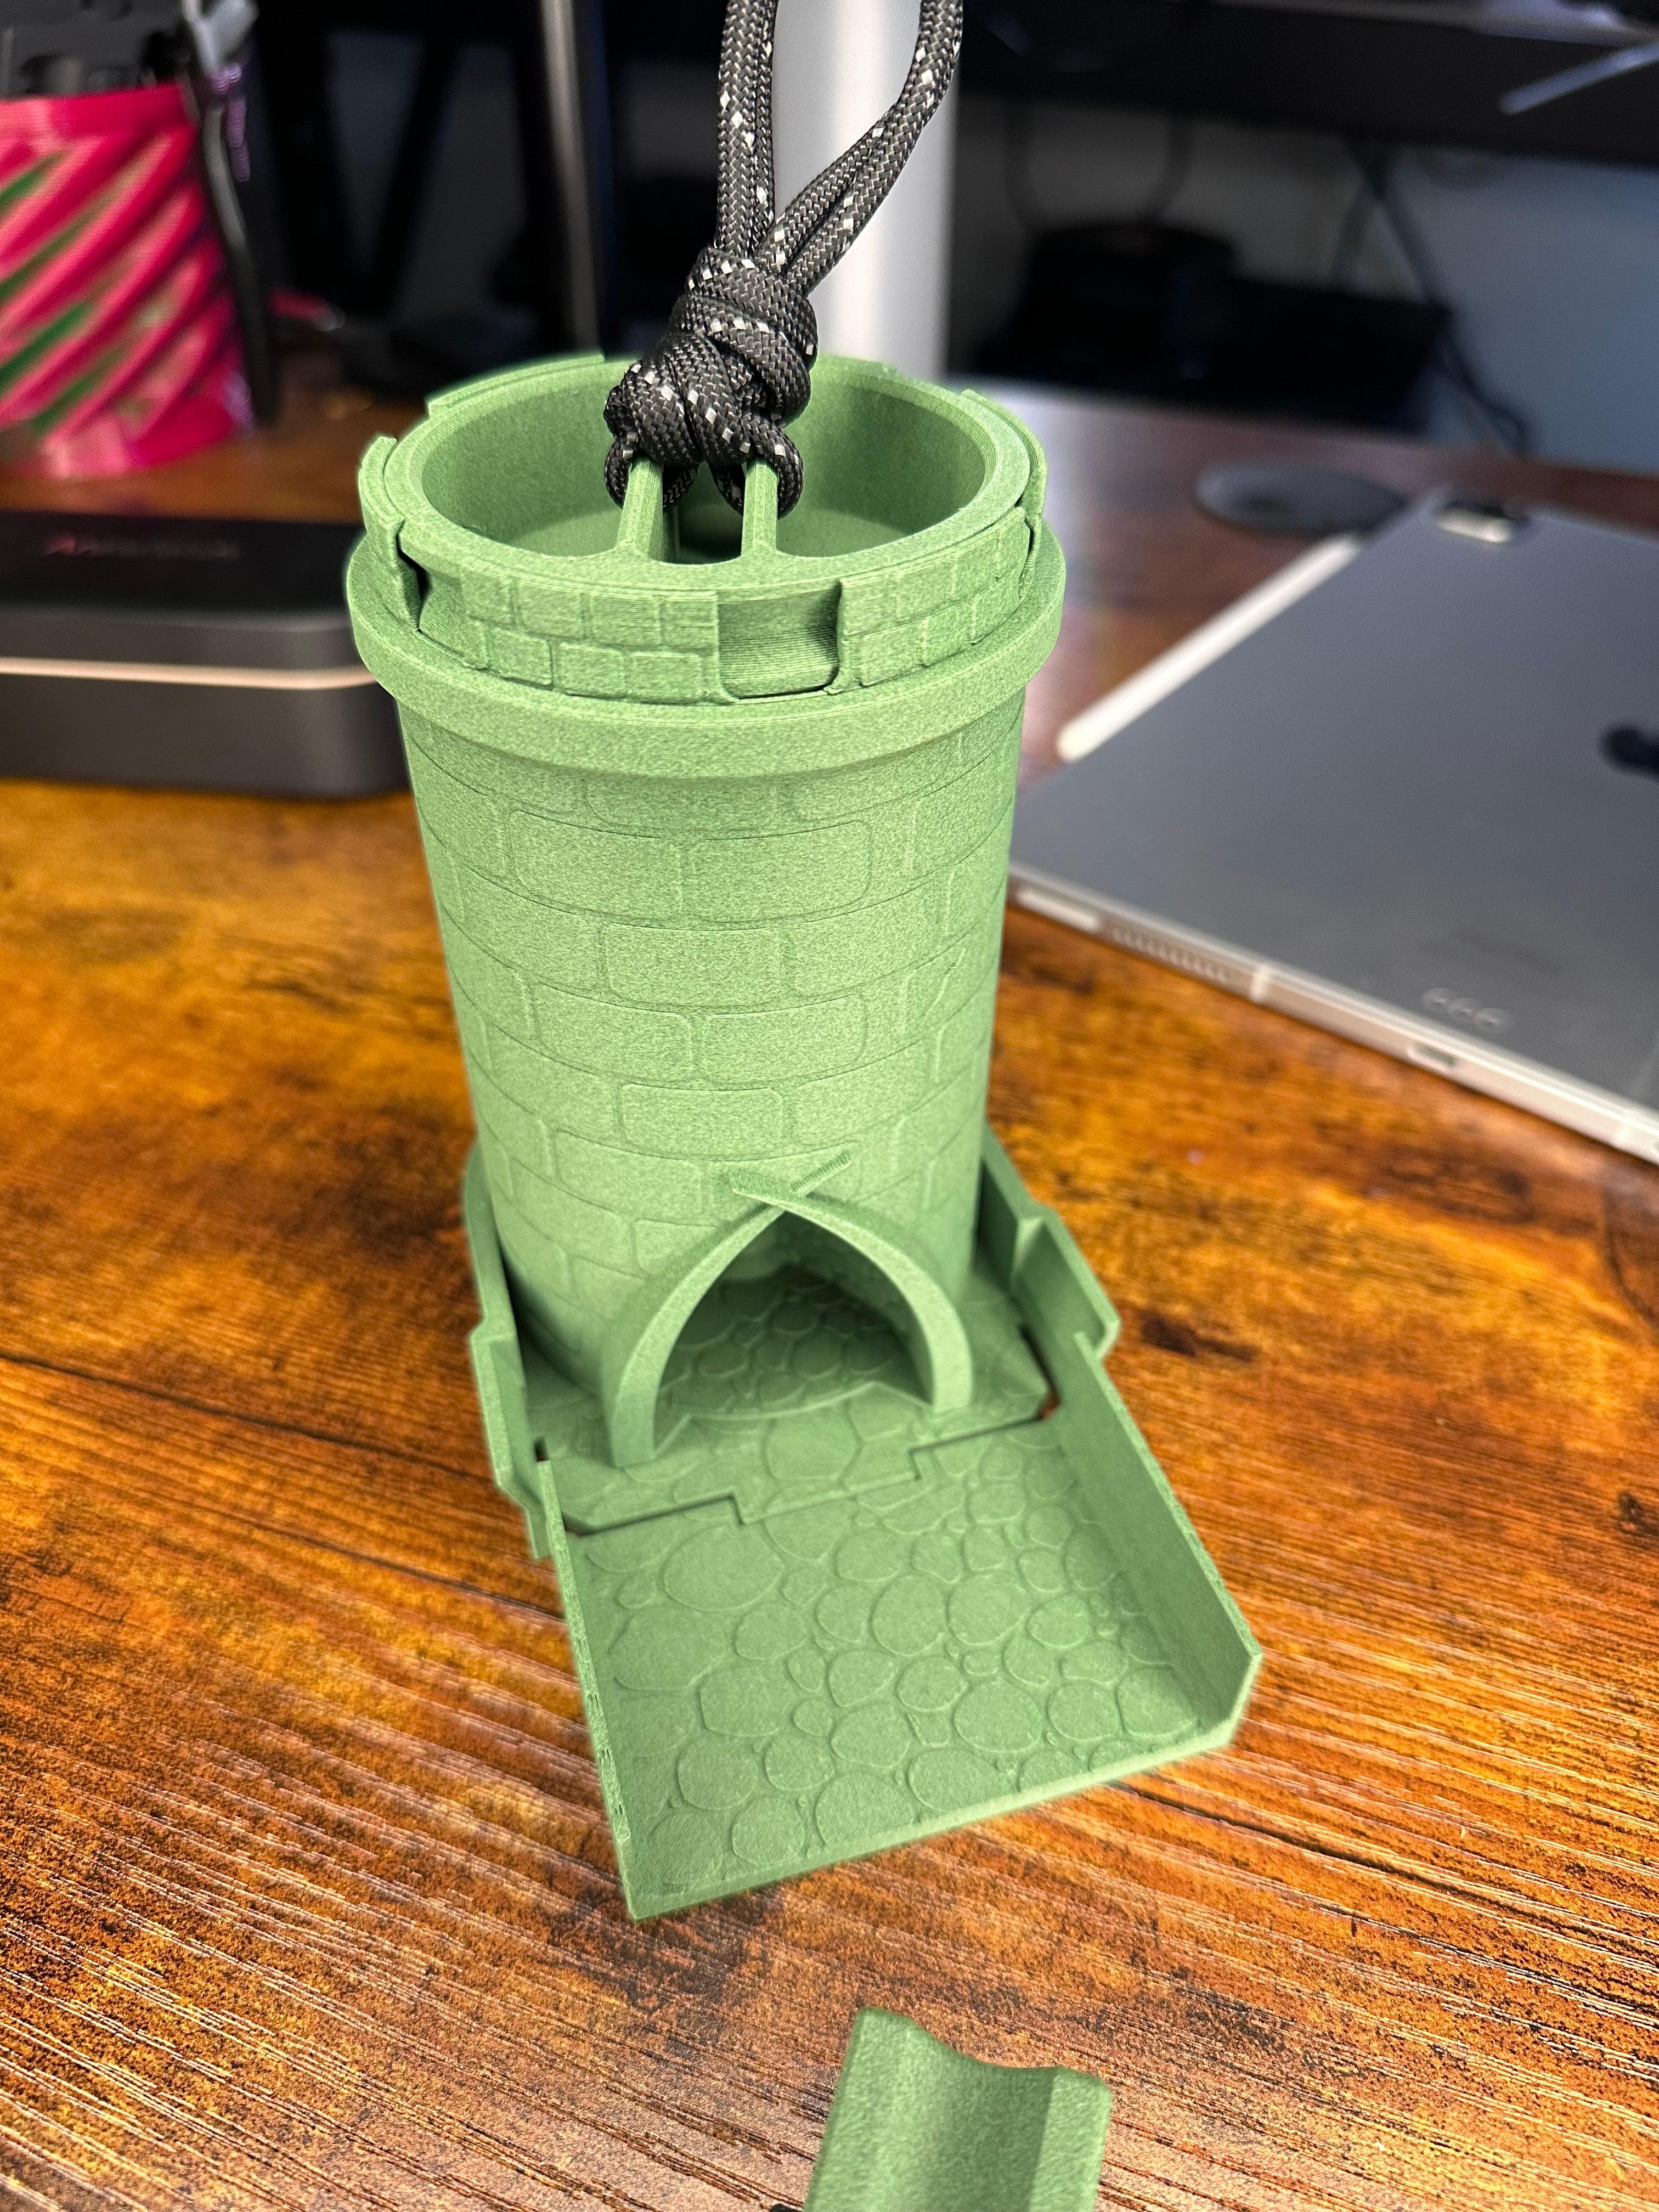 $10 Mini Dice Tower - DND, Dungeon, Dragons, Tabletop Games 3d model